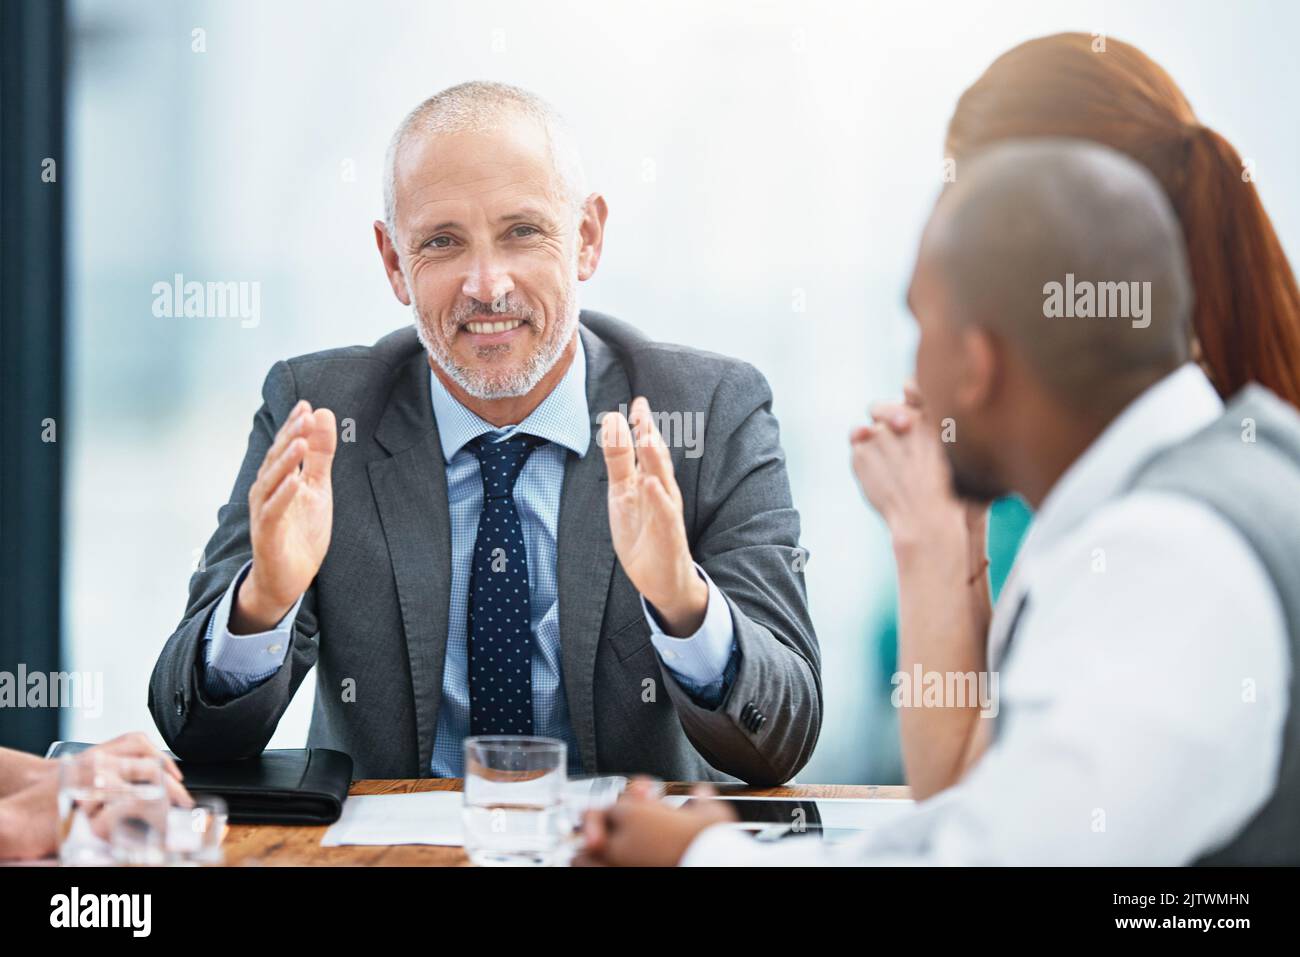 Its all about seeing the bigger picture...a group of businesspeople having a meeting in an office. Stock Photo